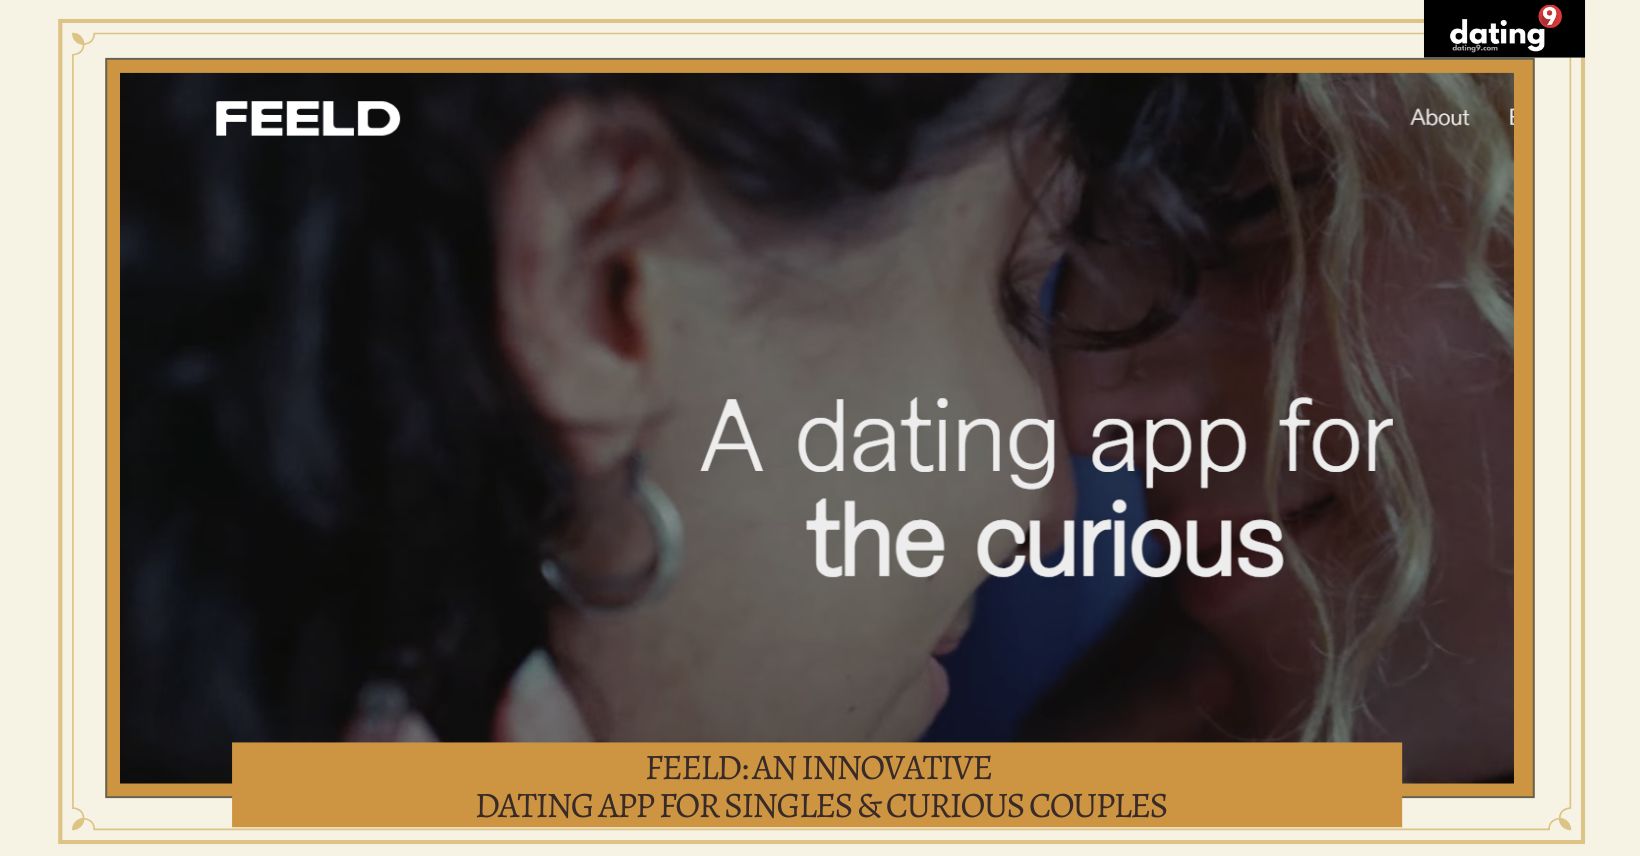 Feeld: An Innovative Dating App for Singles & Curious Couples